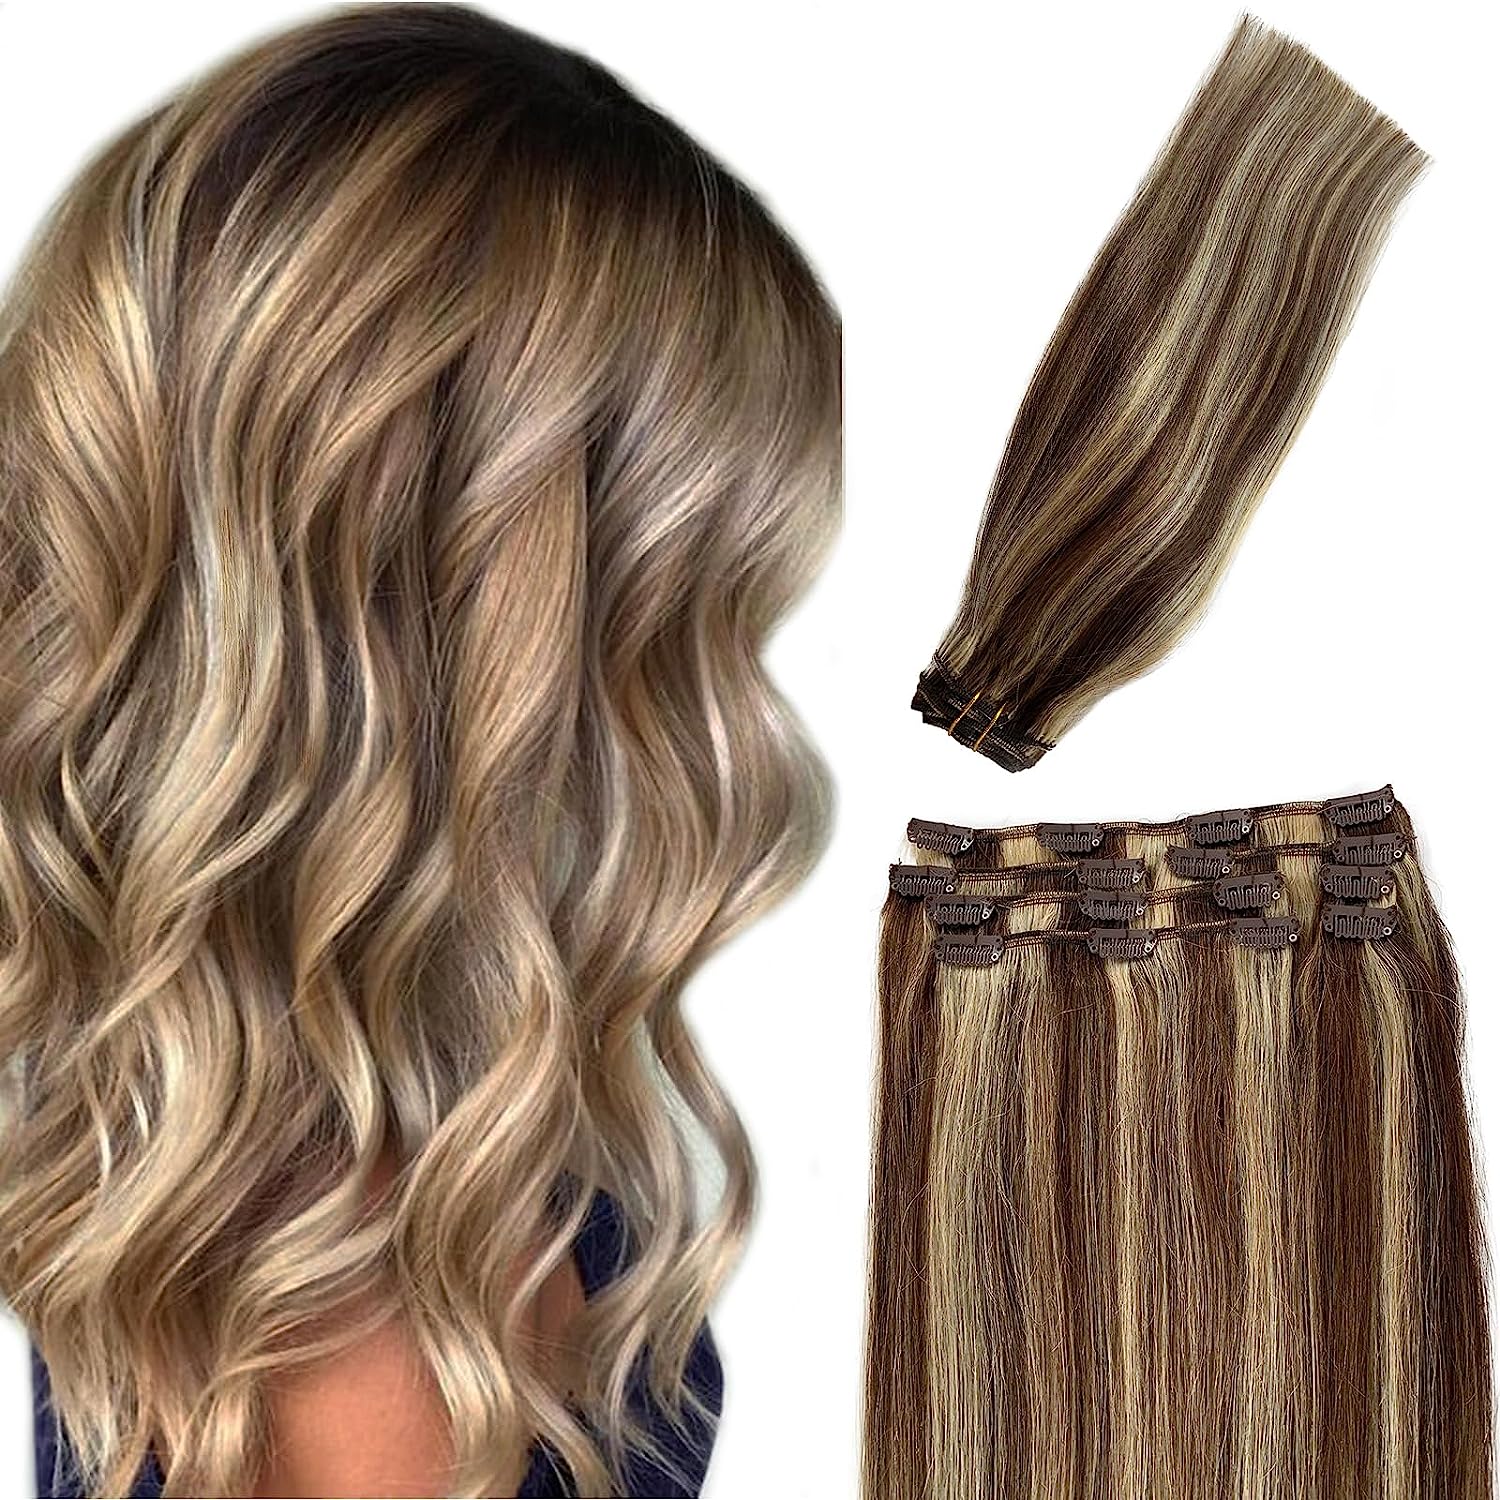 Remy Clip in Hair Extensions Blonde with Brown [...]